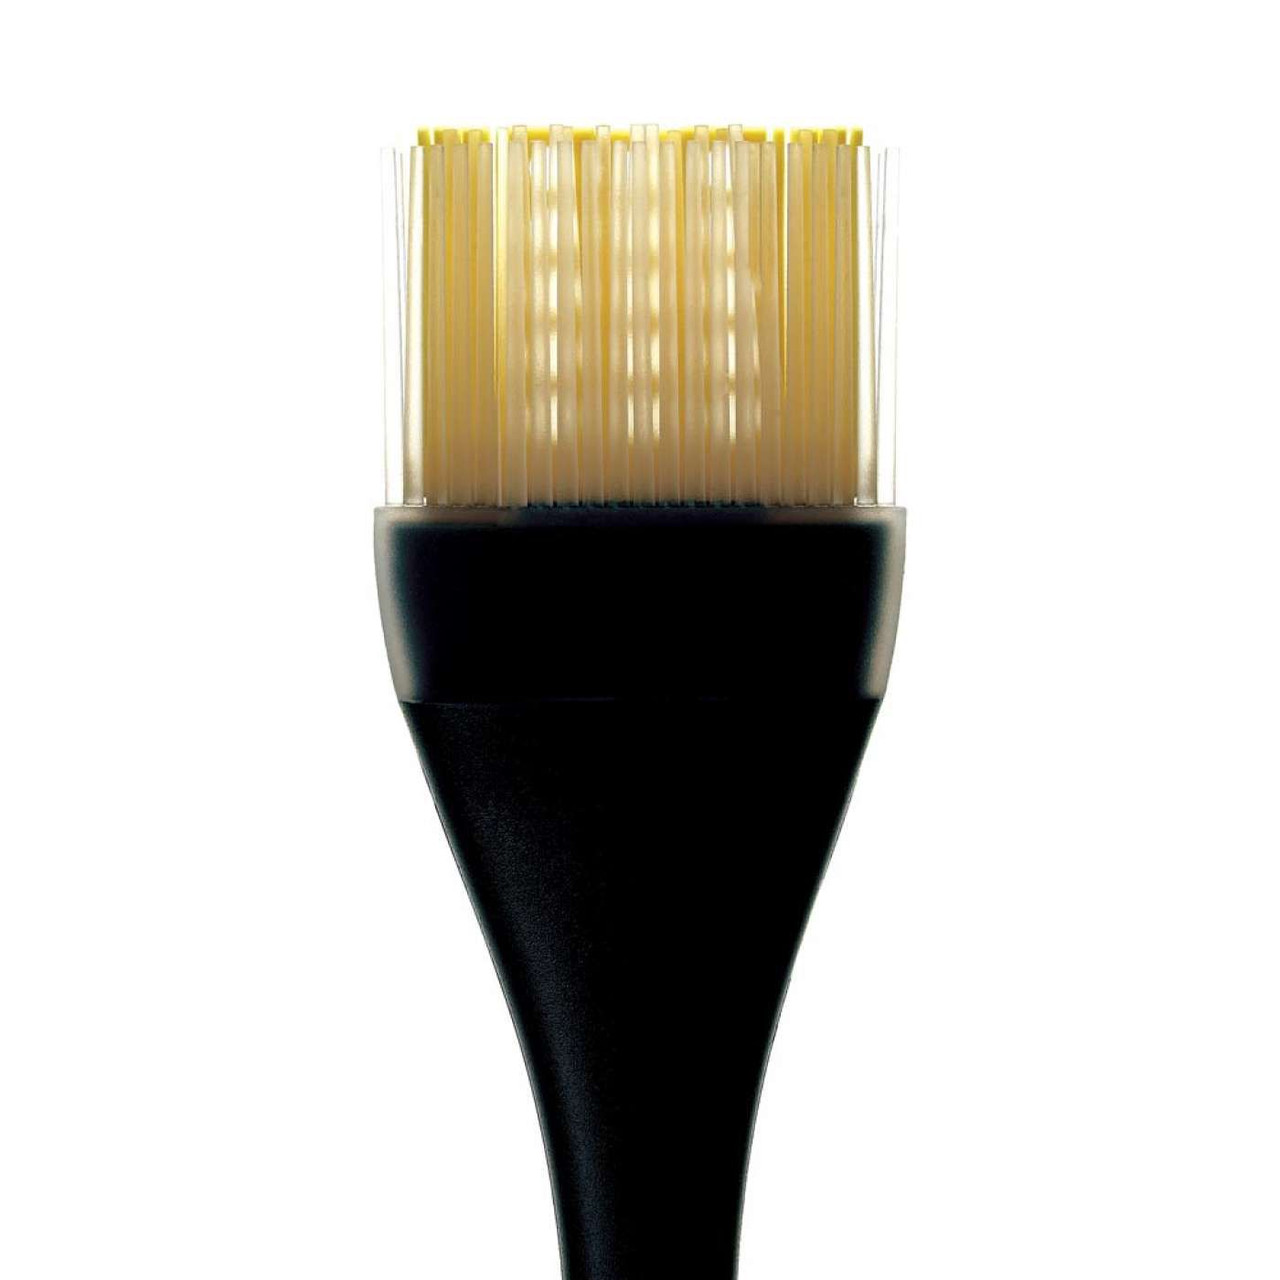 OXO Good Grips Silicone Basting Brush - Fante's Kitchen Shop - Since 1906